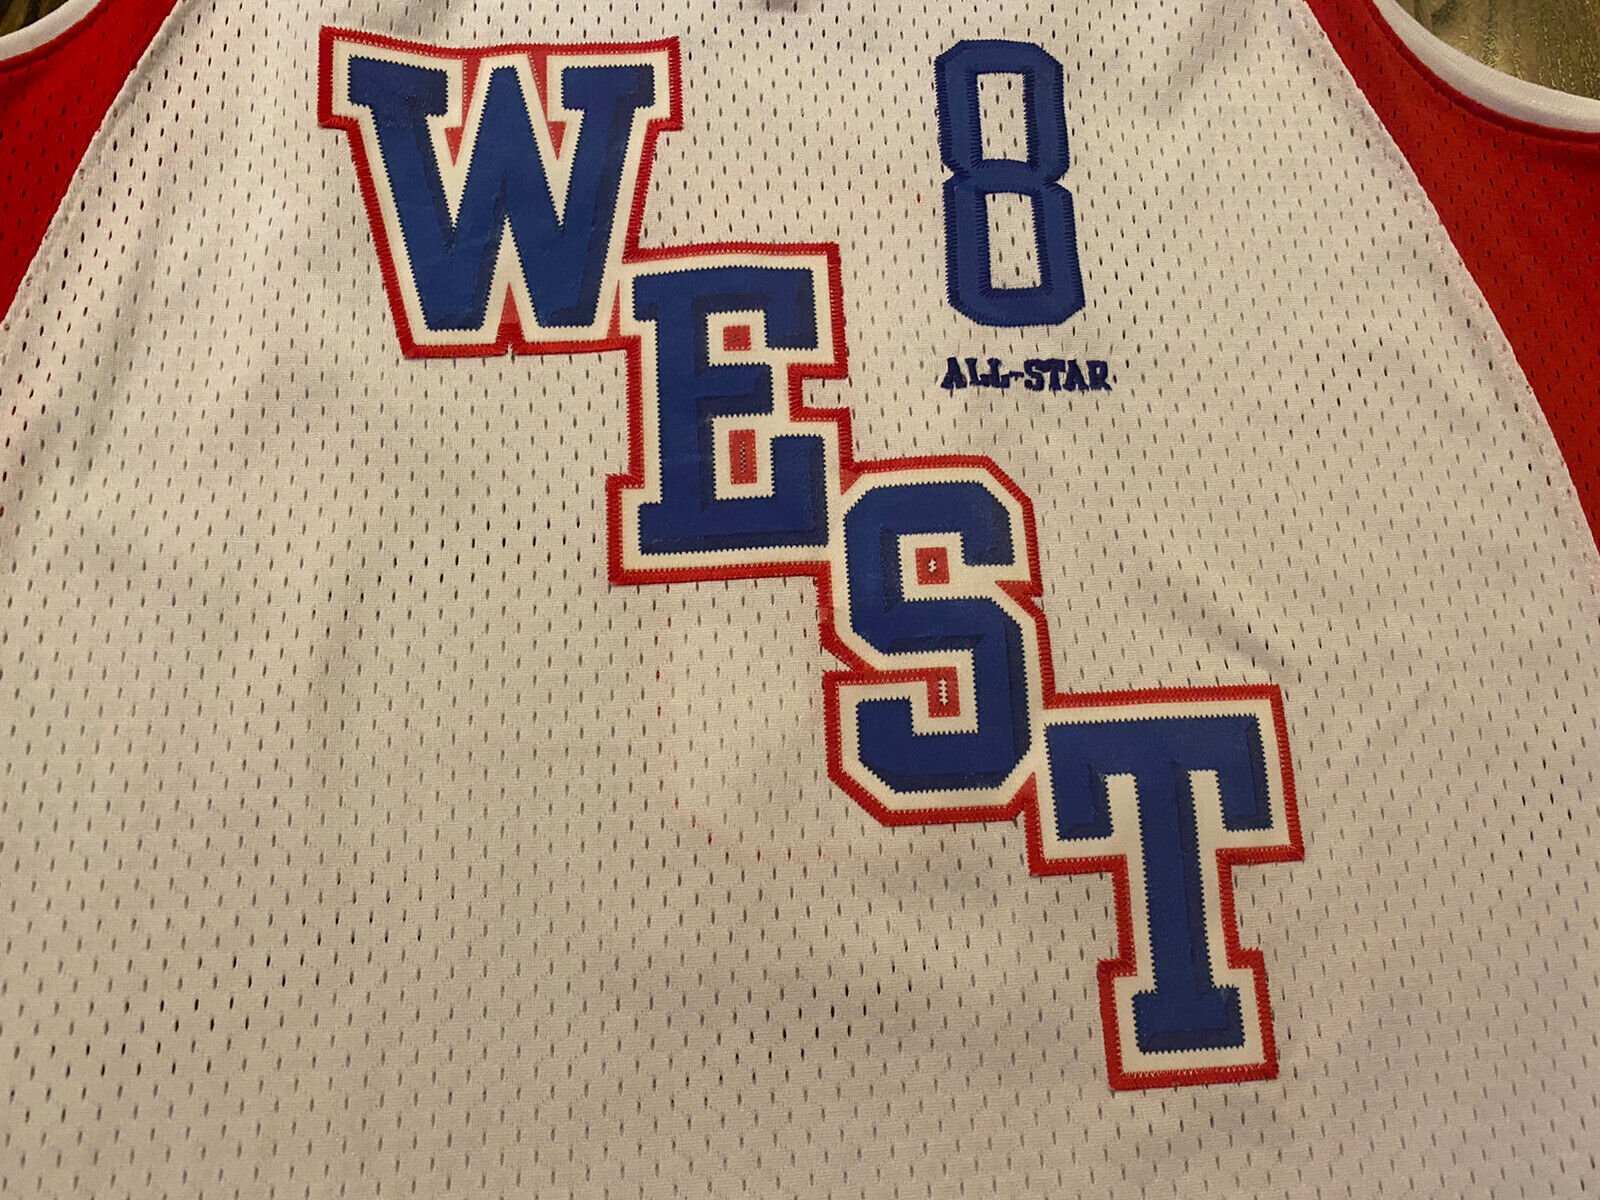 All Star Customized Number Kit for 2004 Eastern Conference Cream Jersey –  Customize Sports